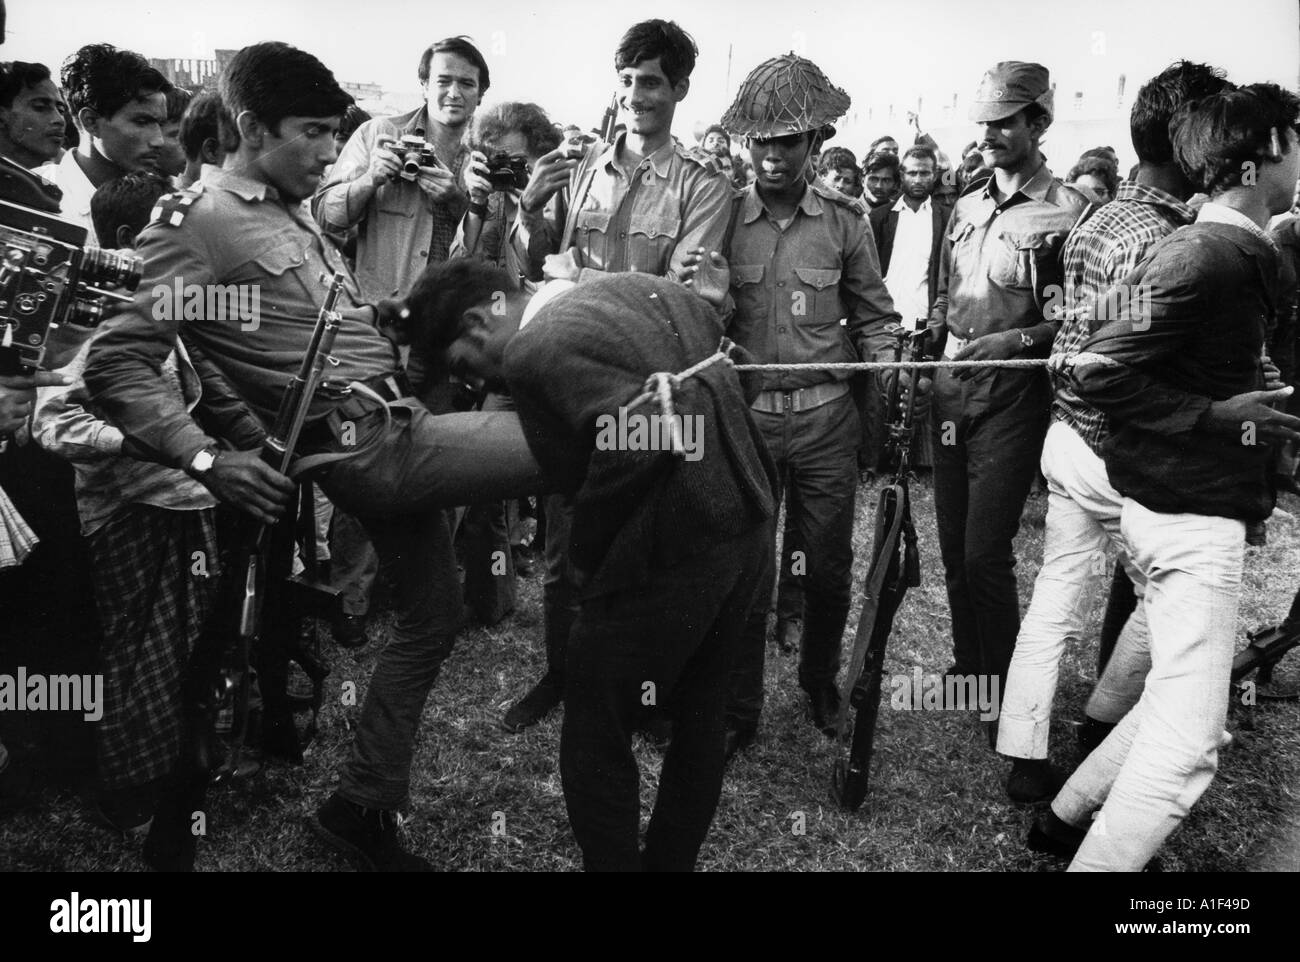 The infamous bayonetting of 5 young men during Bengal s victory rally Dacca Stadium Dec 18 1971 Stock Photo